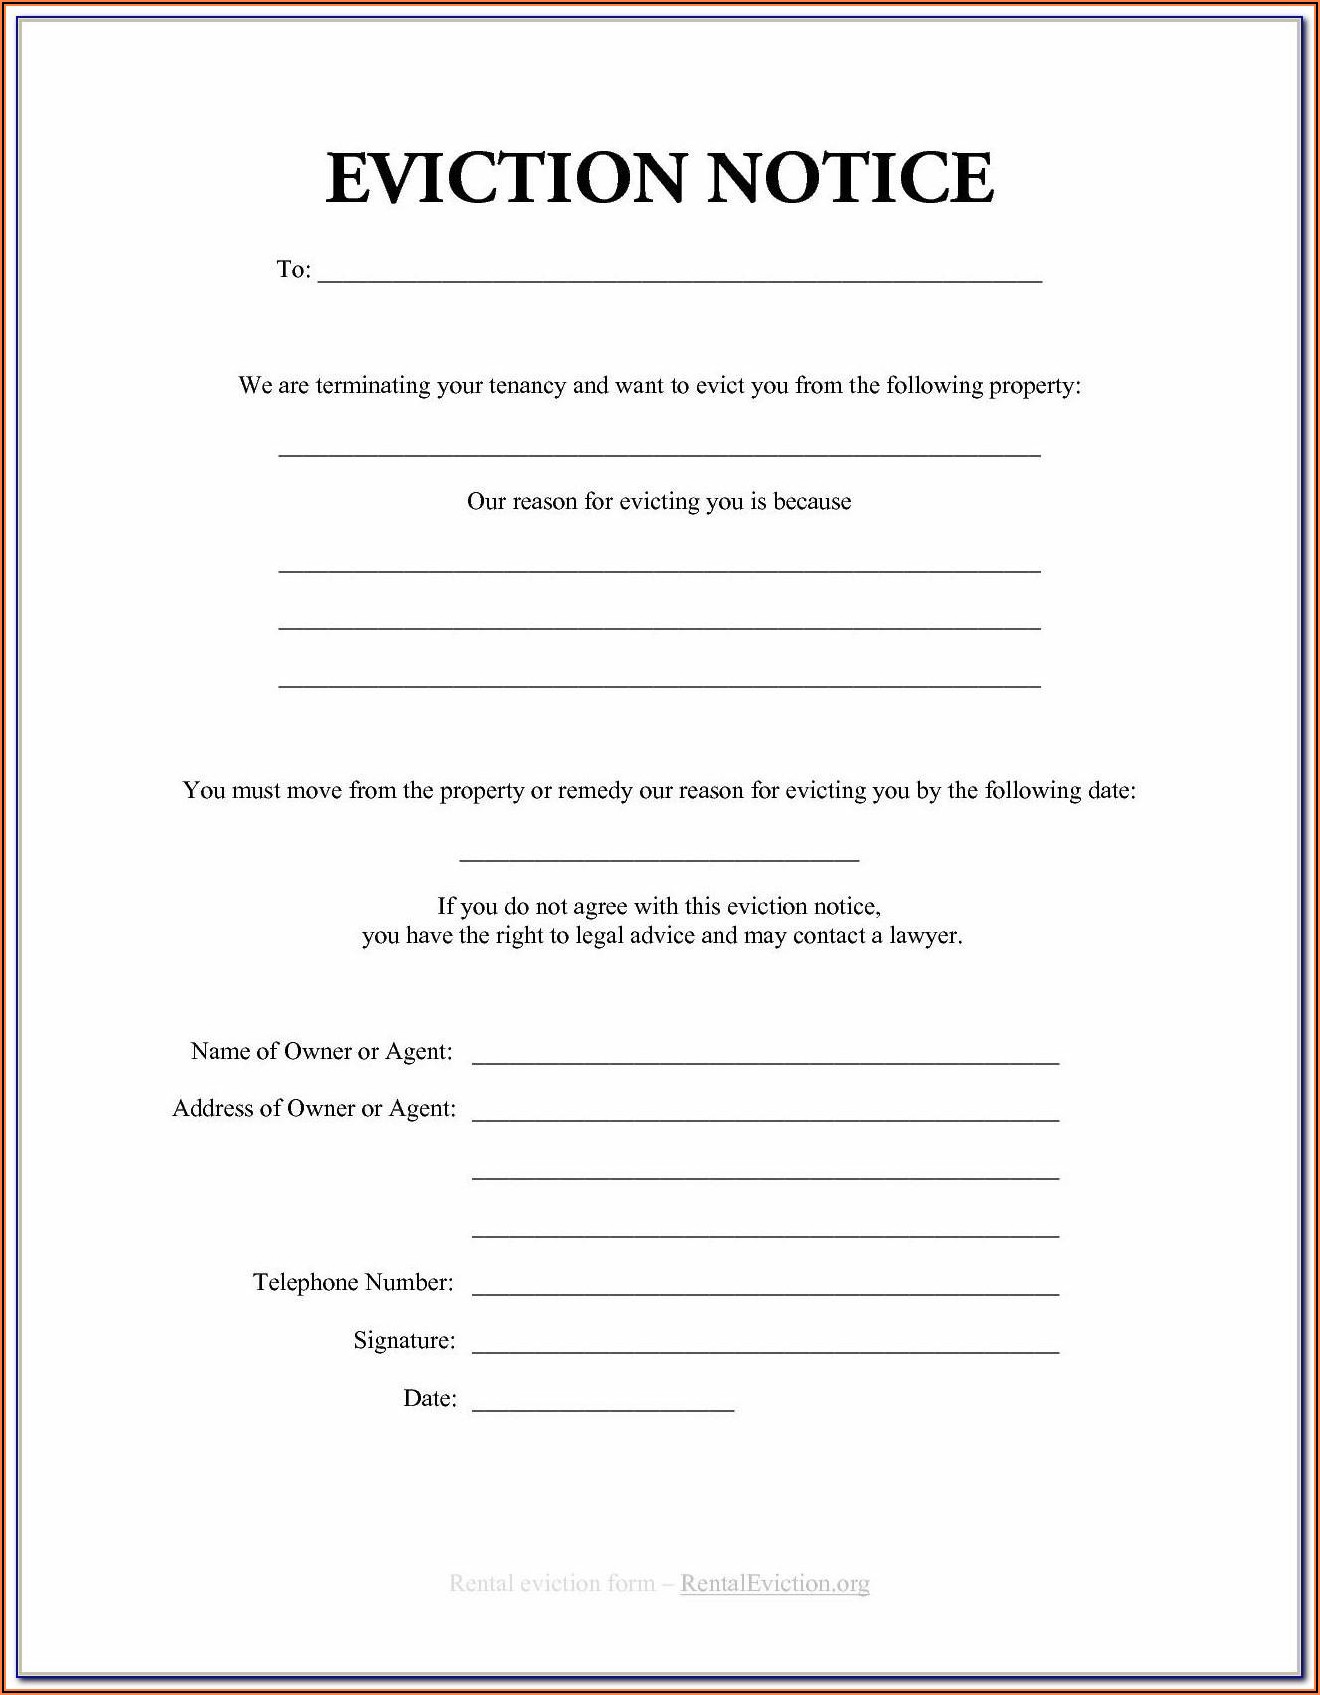 Ontario Landlord Eviction Notice Form